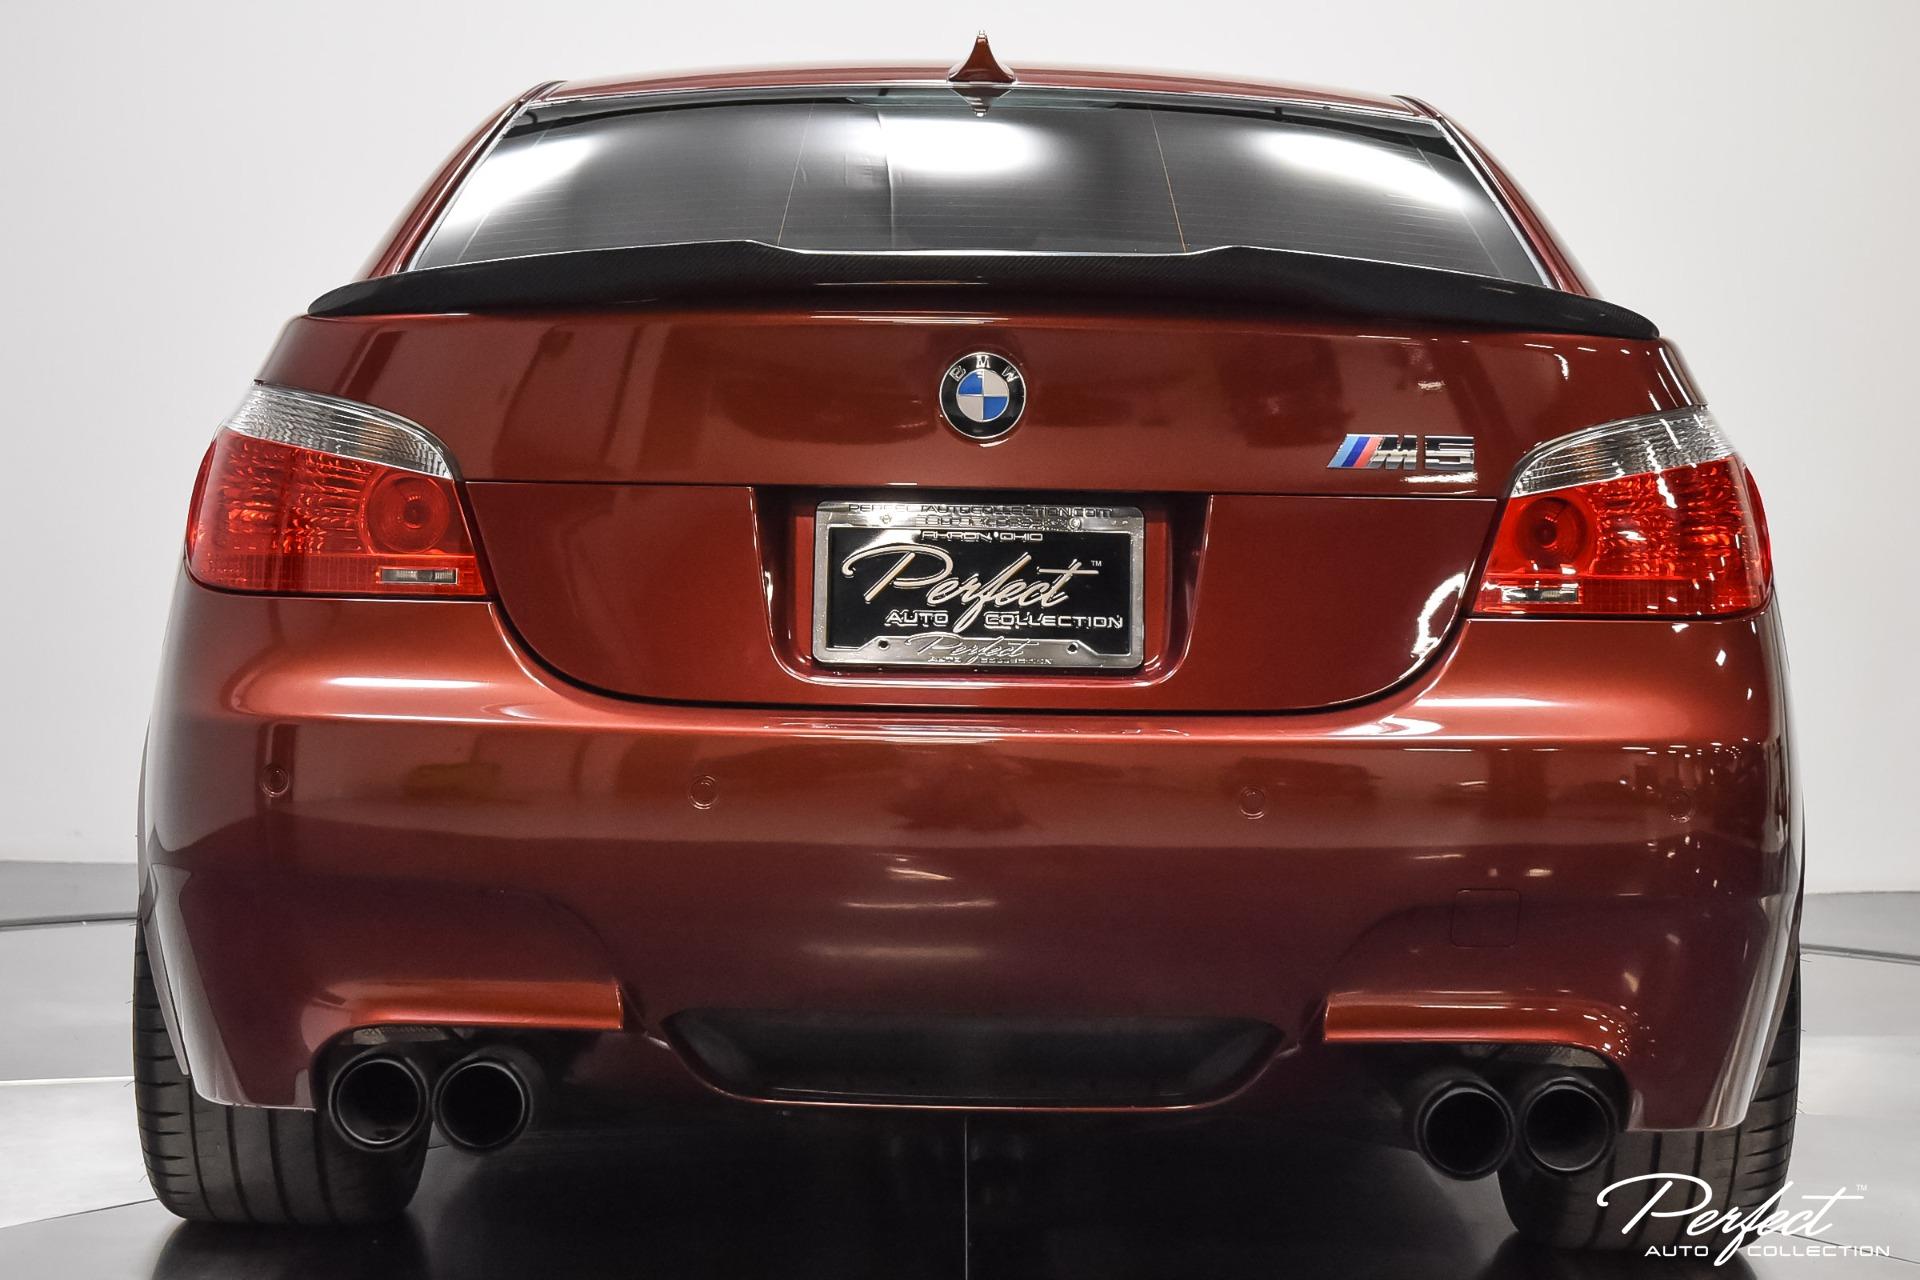 Used 2007 BMW M5 For Sale (Sold)  West Coast Exotic Cars Stock #C1175